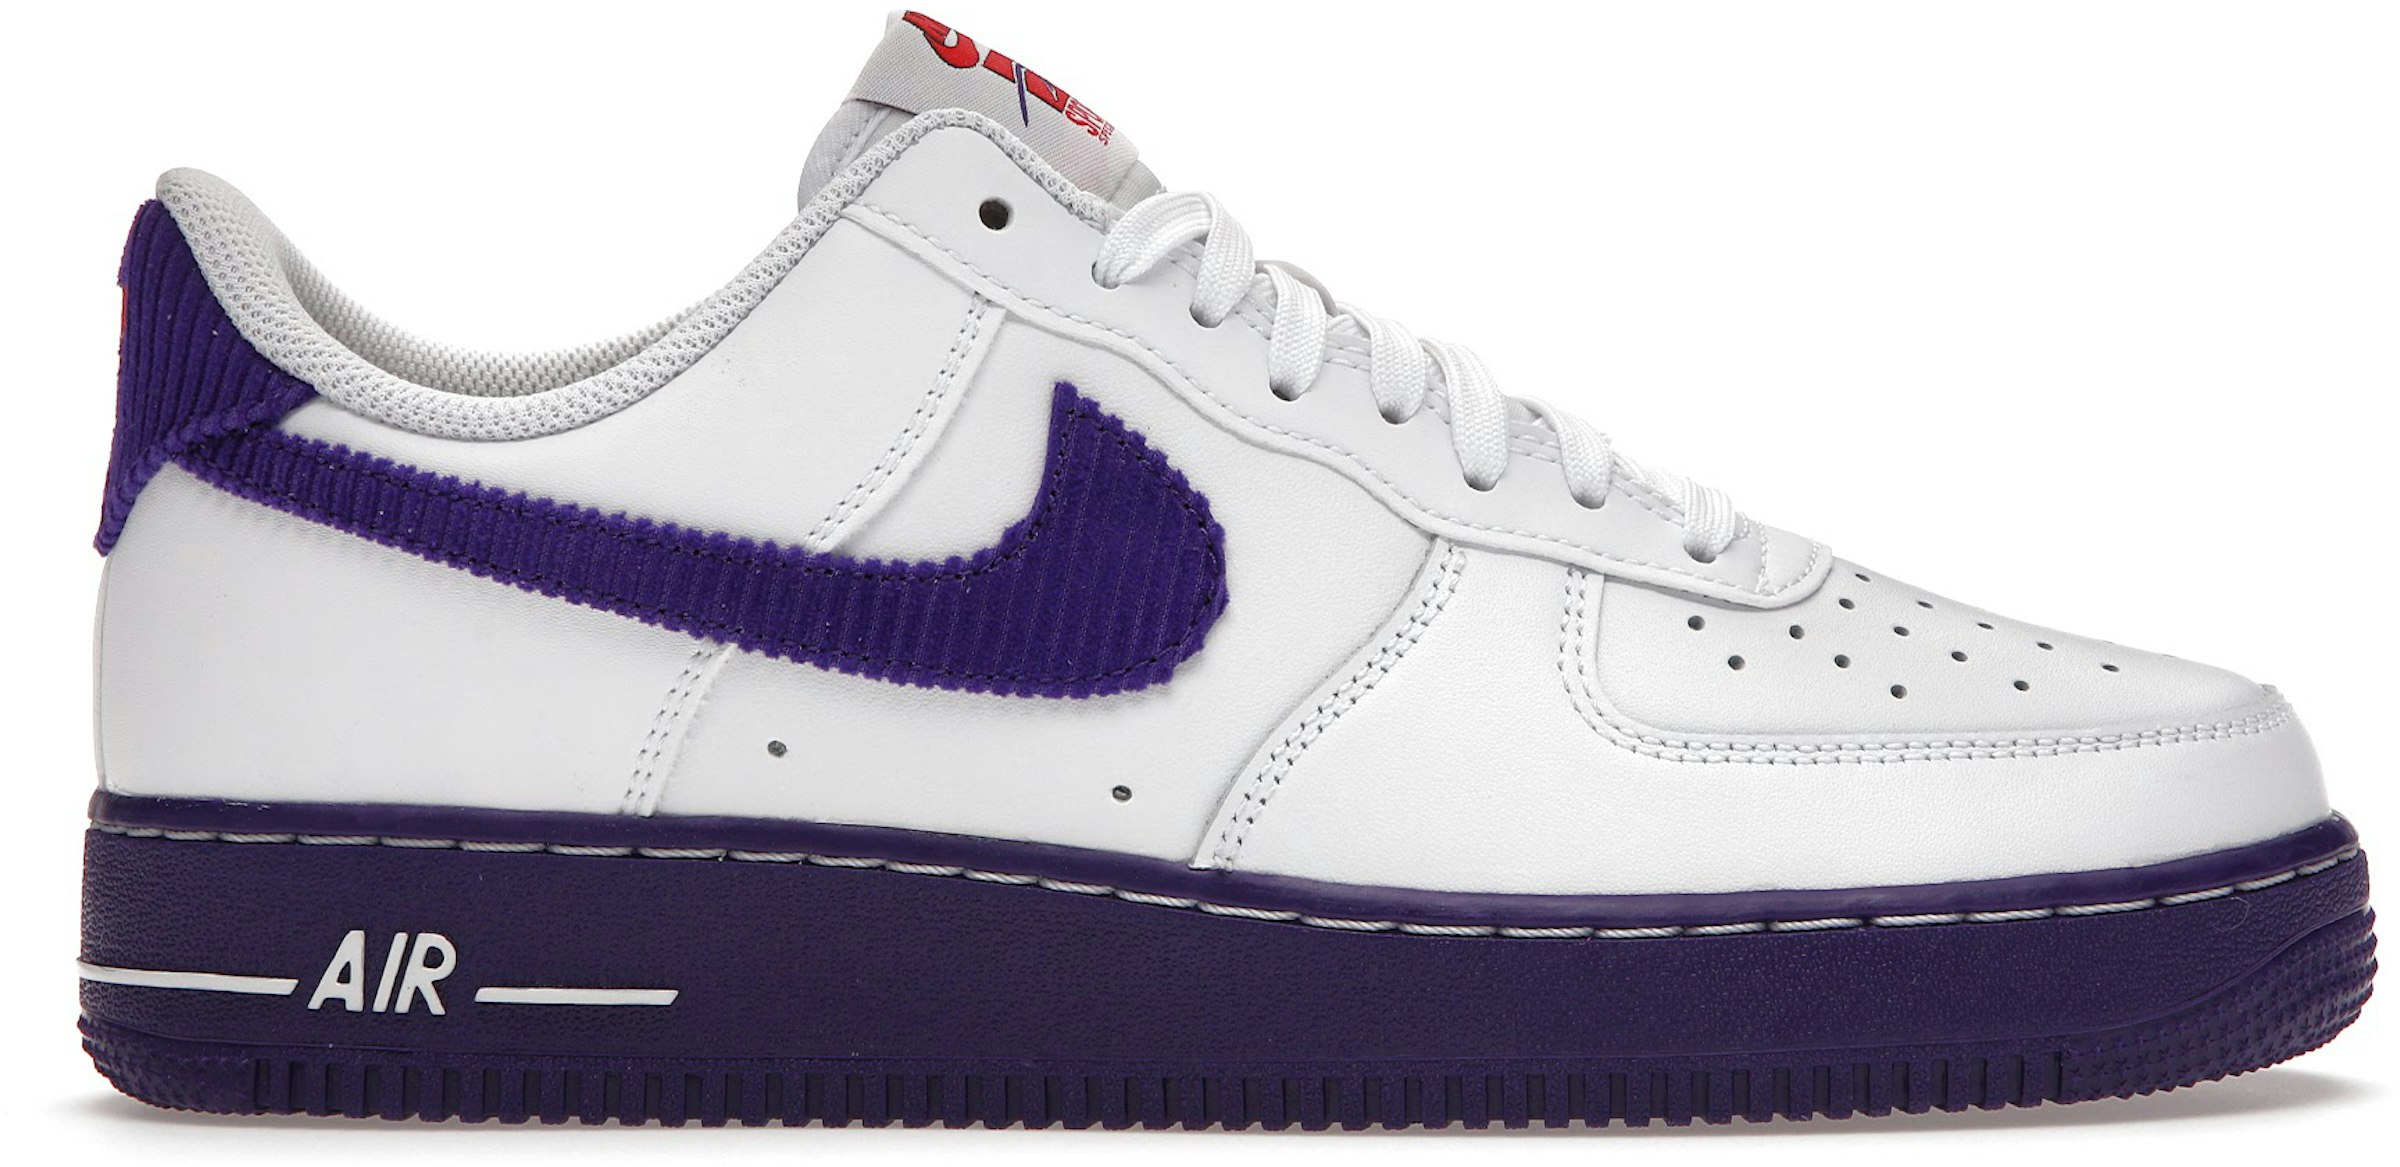 Nike Air Force 1 Low Sports Men's - DB0264-100 - US